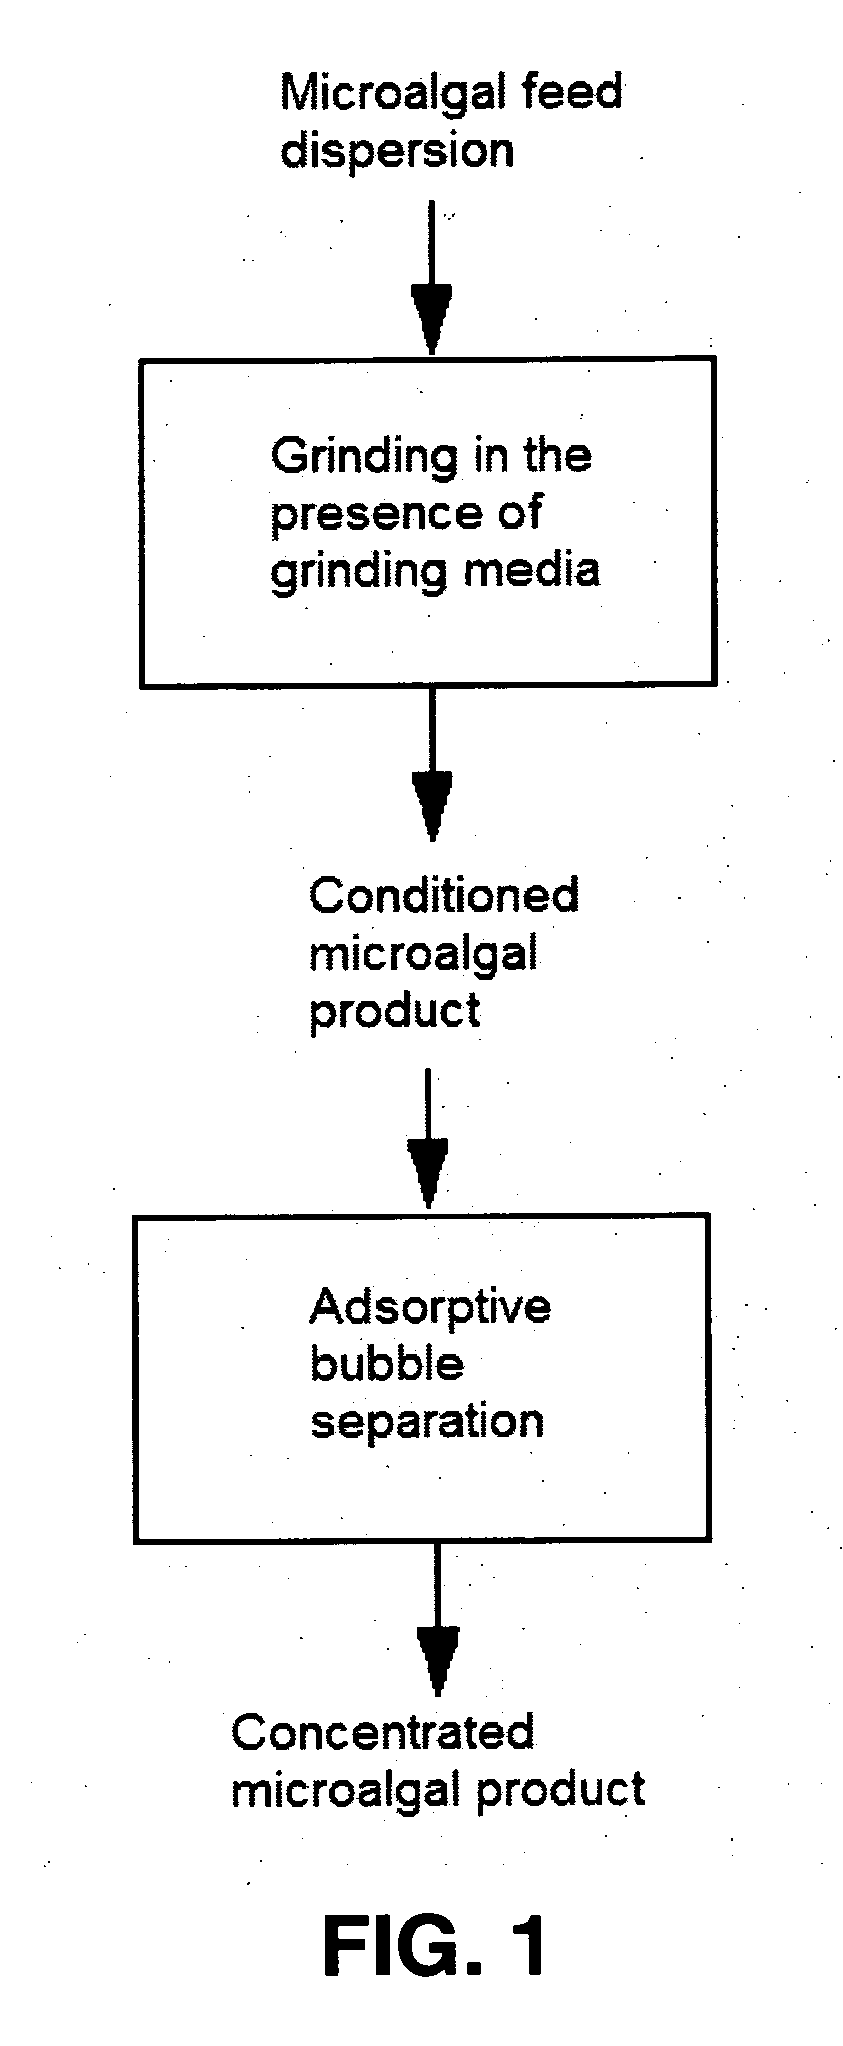 Process for microalgae conditioning and concentration